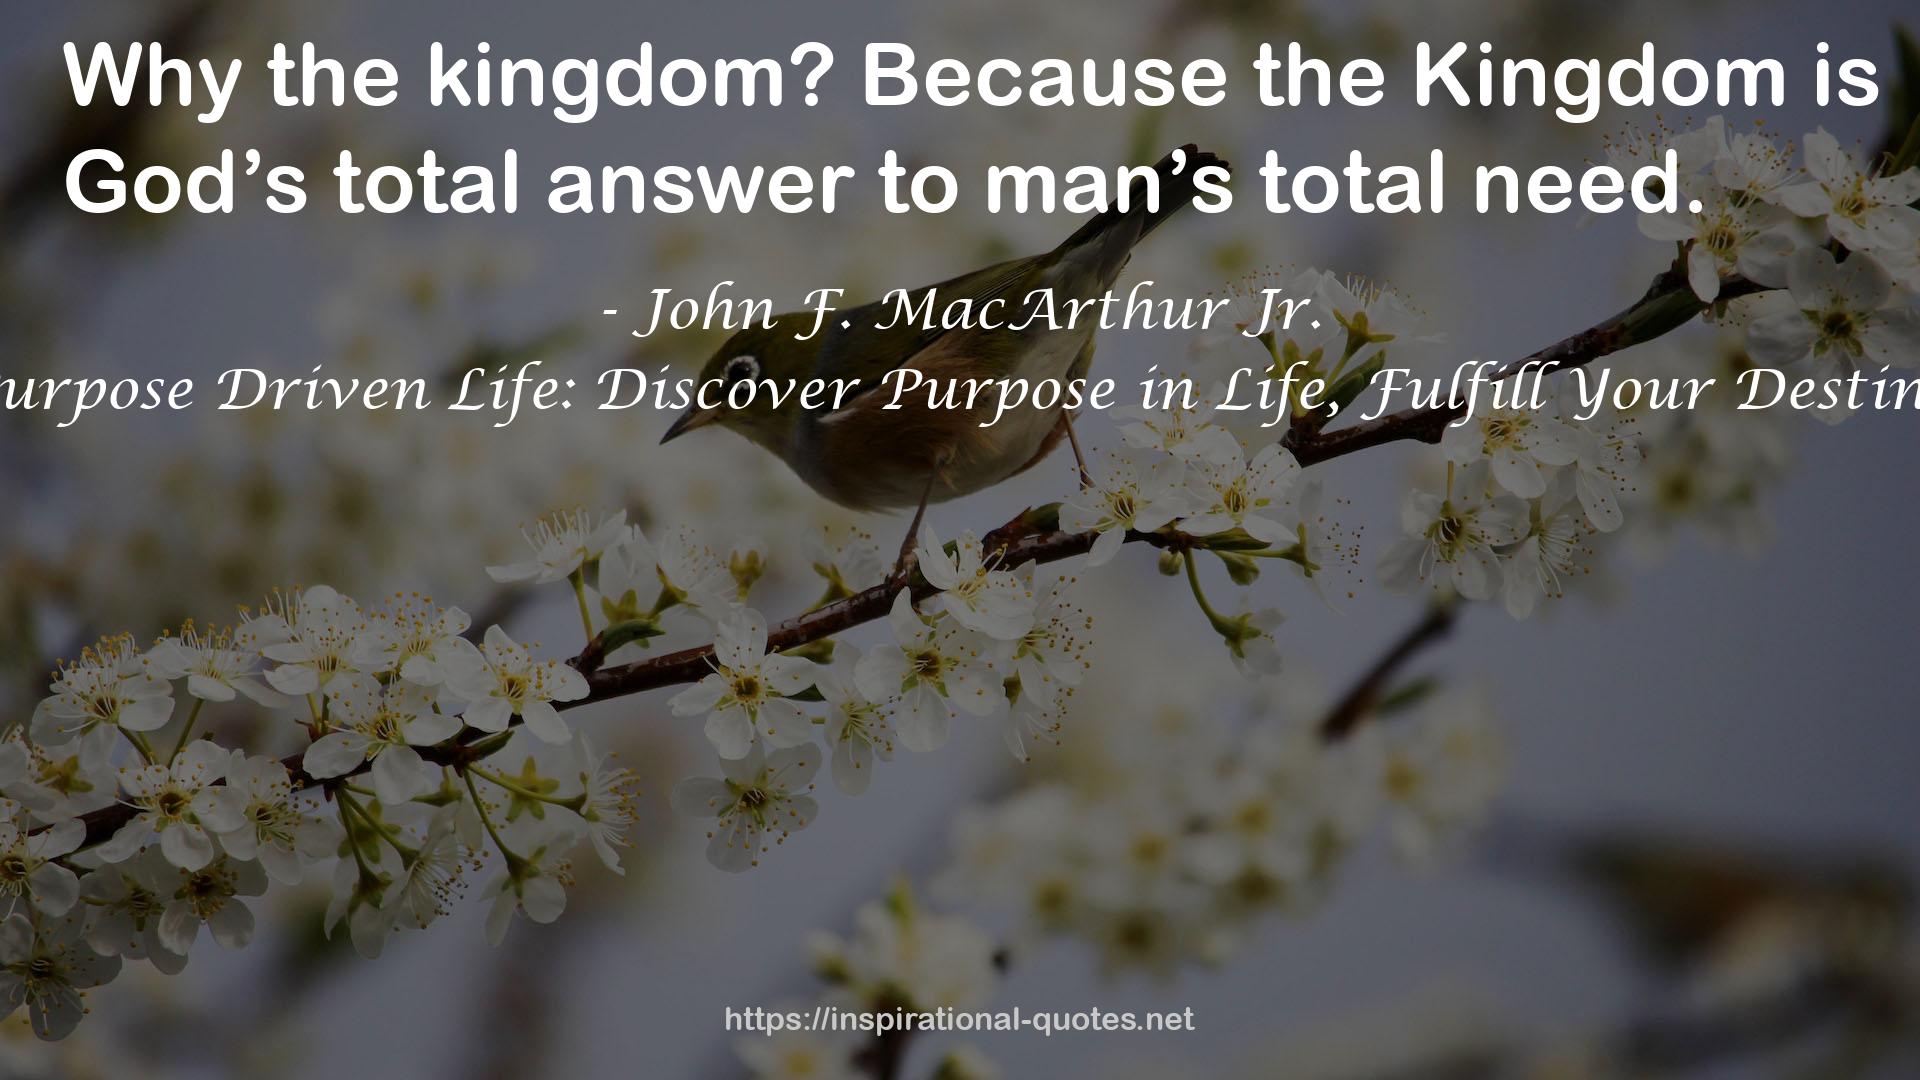 Purpose Driven Life: Discover Purpose in Life, Fulfill Your Destiny QUOTES